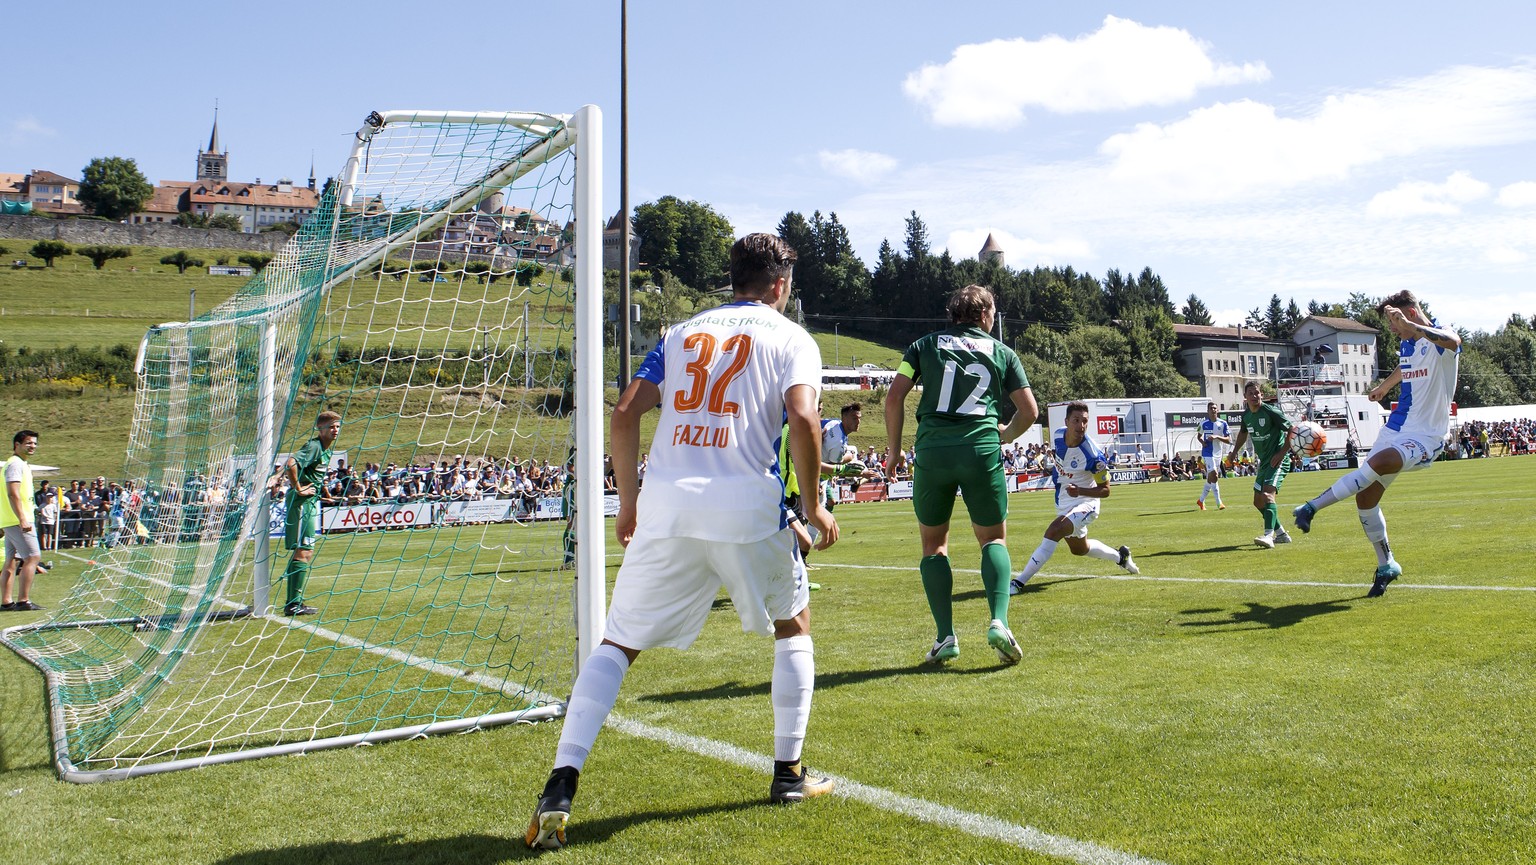 Grasshopper&#039;s defender Cedric Zesiger, 2nd right, shoots the ball, during the Swiss Cup Round of 64 between CS Romontois and Grasshopper Club Zuerich, at the stade du Glaney stadium, in Romont, S ...